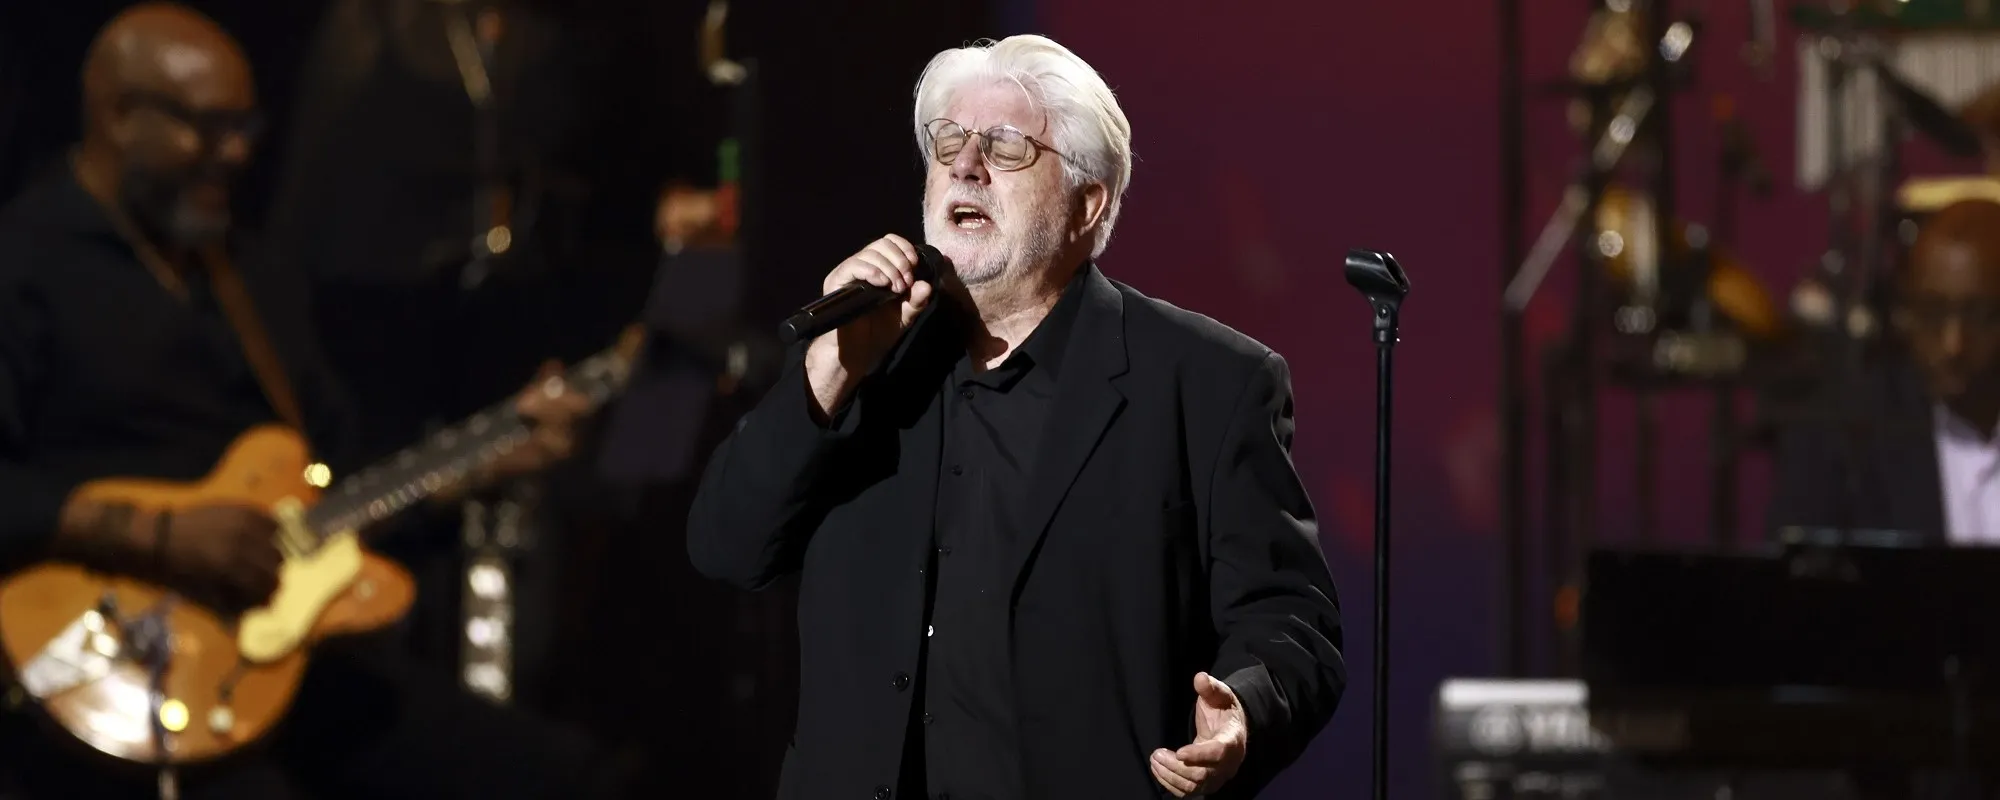 Michael McDonald Releasing Autobiography Co-Written with 1990s TV Star